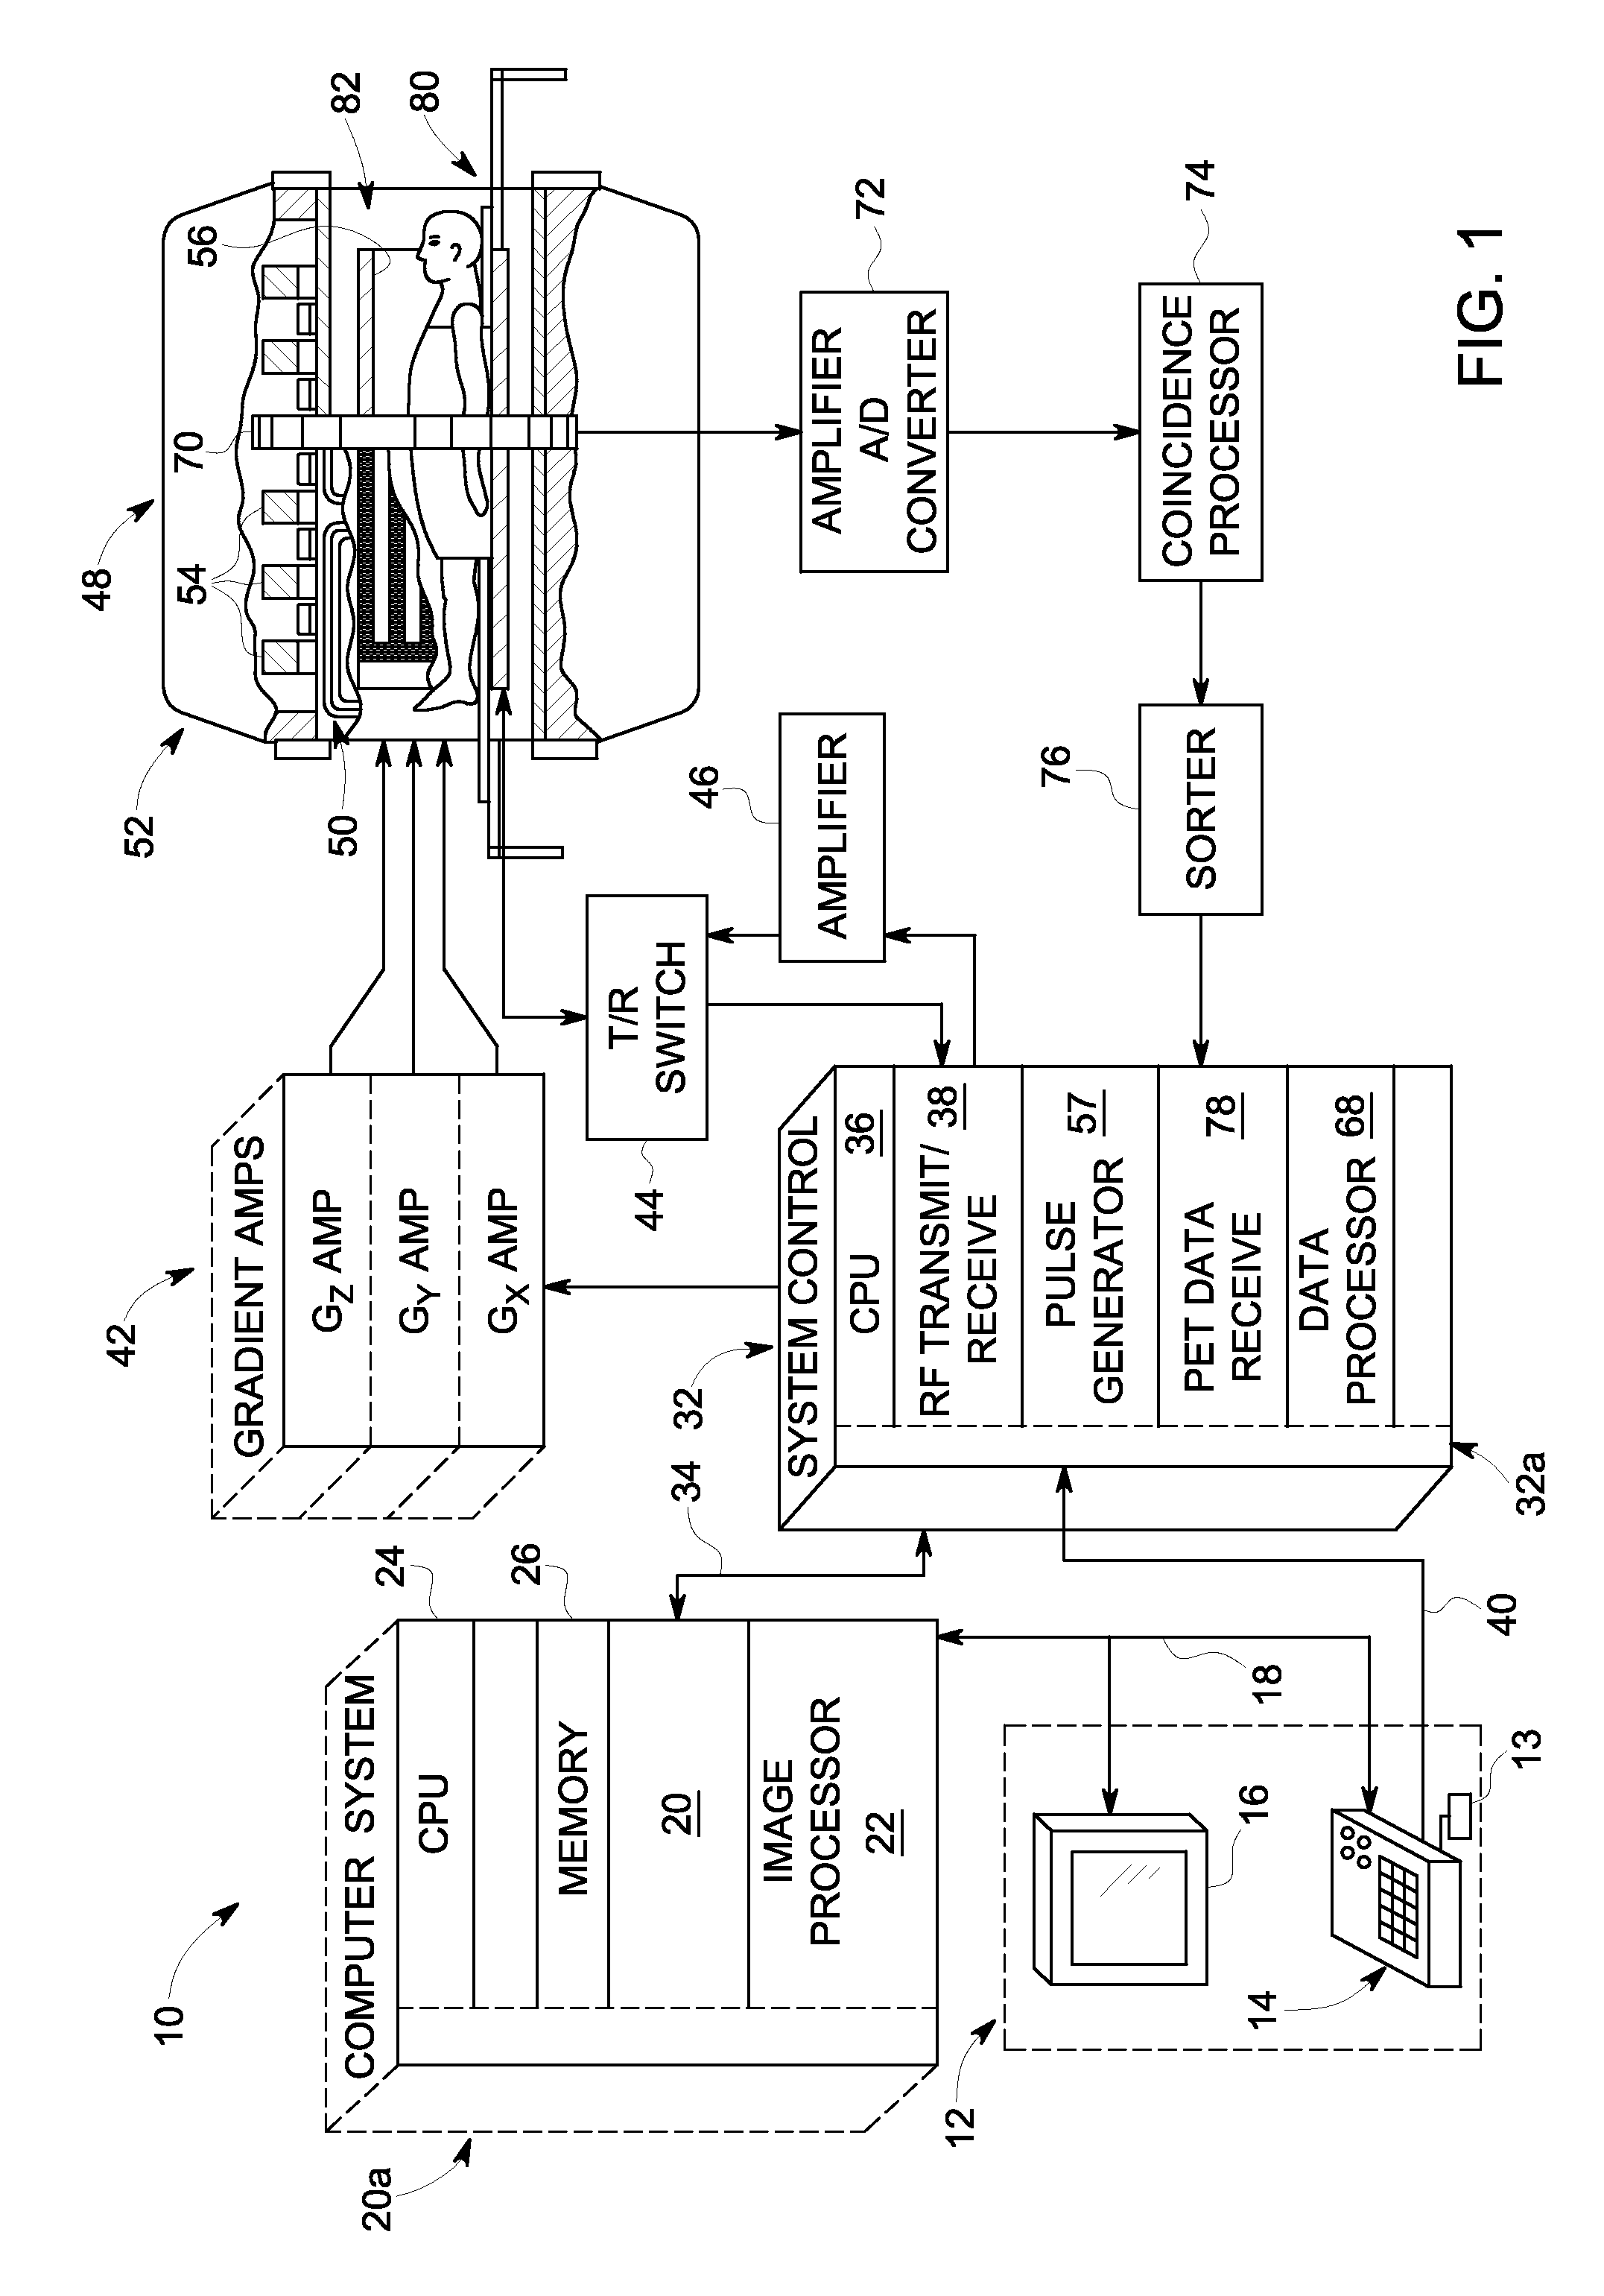 Surface stationary array coil structure for multi-modality imaging